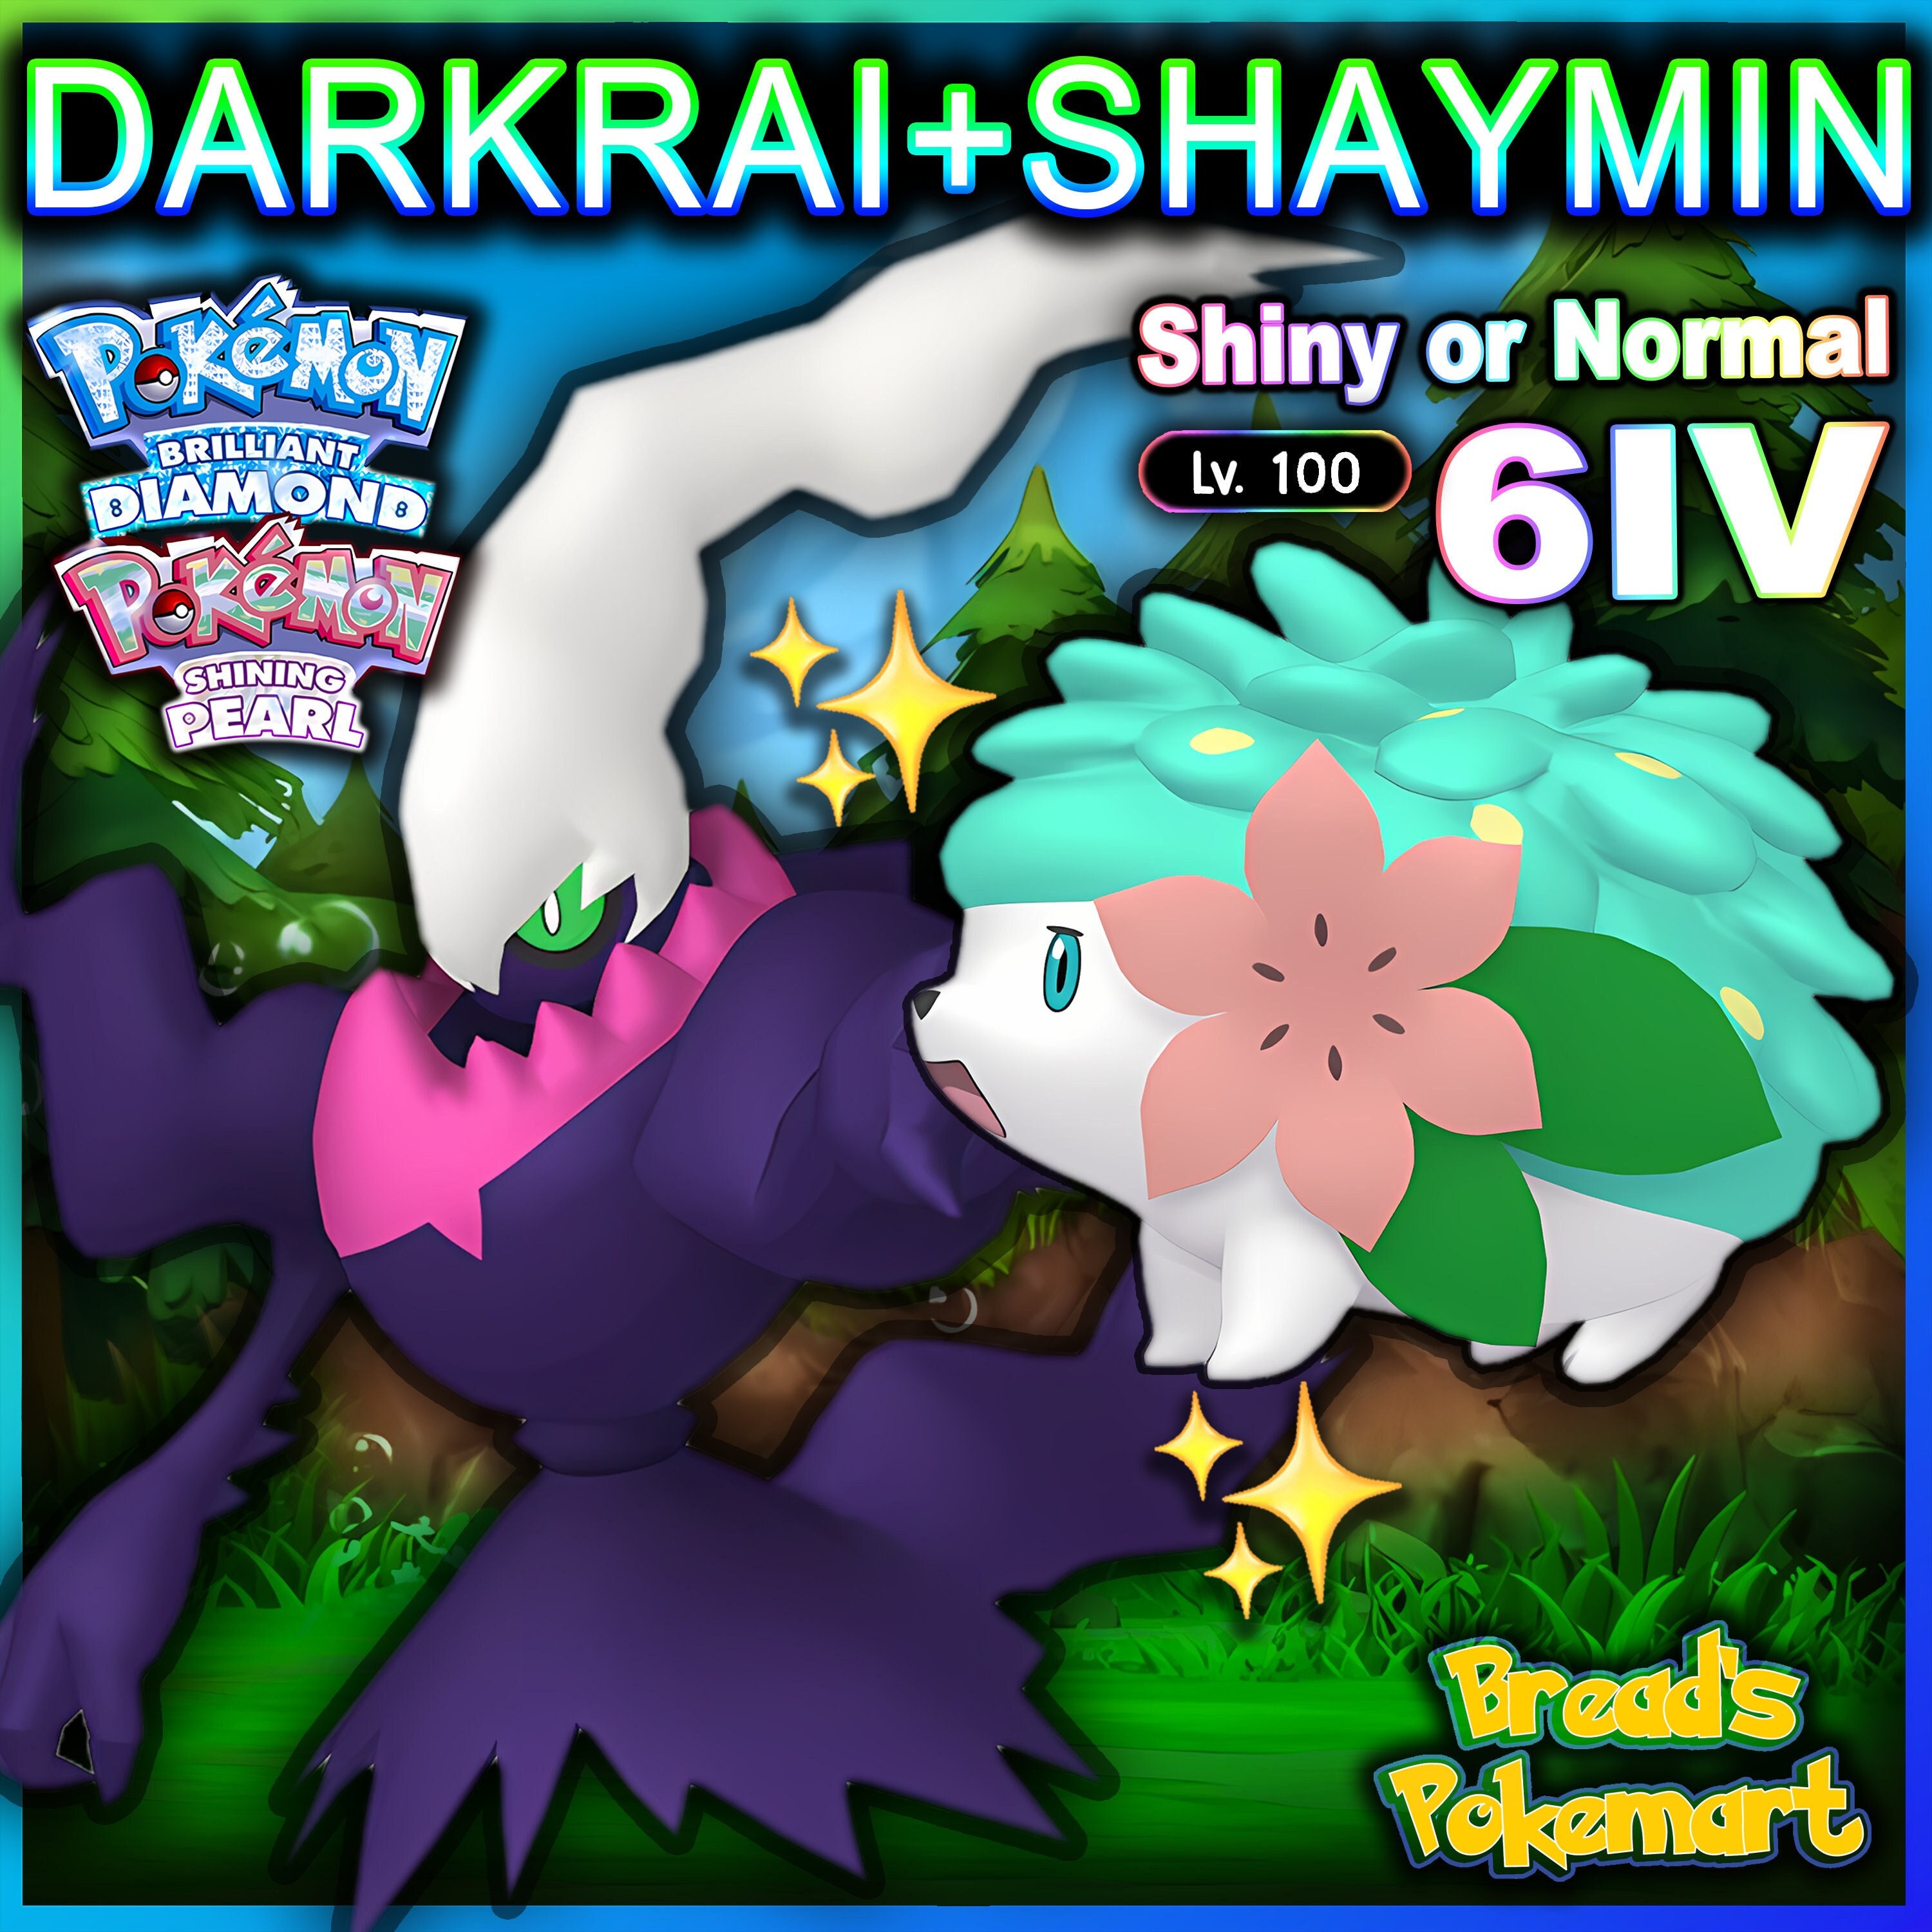 SHAYMIN SKY, 6IV TIMID, BATTLE-READY MYTHICAL, Pokemon Scarlet and  Violet